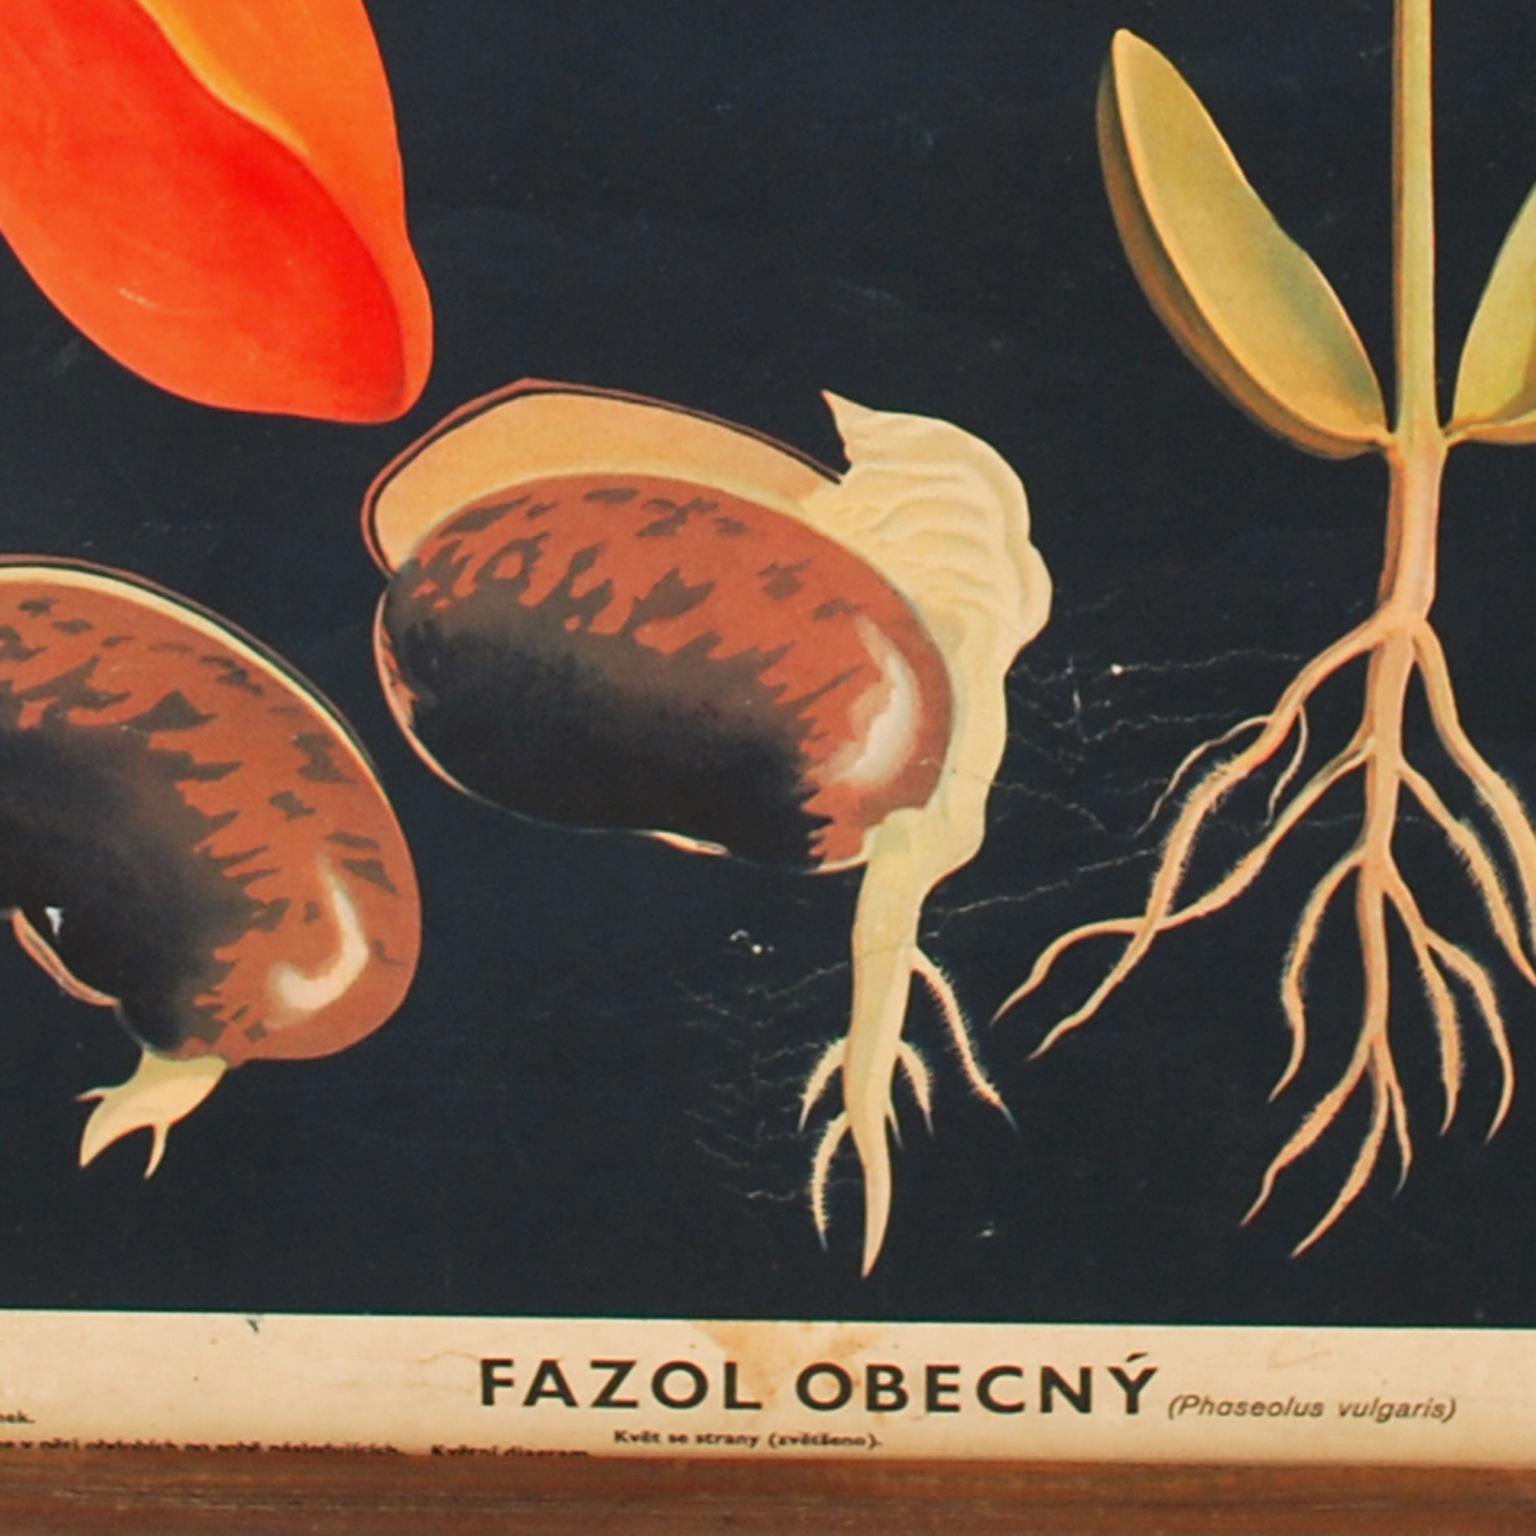 Coloured lithograph on paper depicting the botanical study of the Phaseolus vulgaris, legume coming from Central America; Bohemian manufacture, 1920s. The black background and colors make the litograph very elegant and refined. Very good condition.